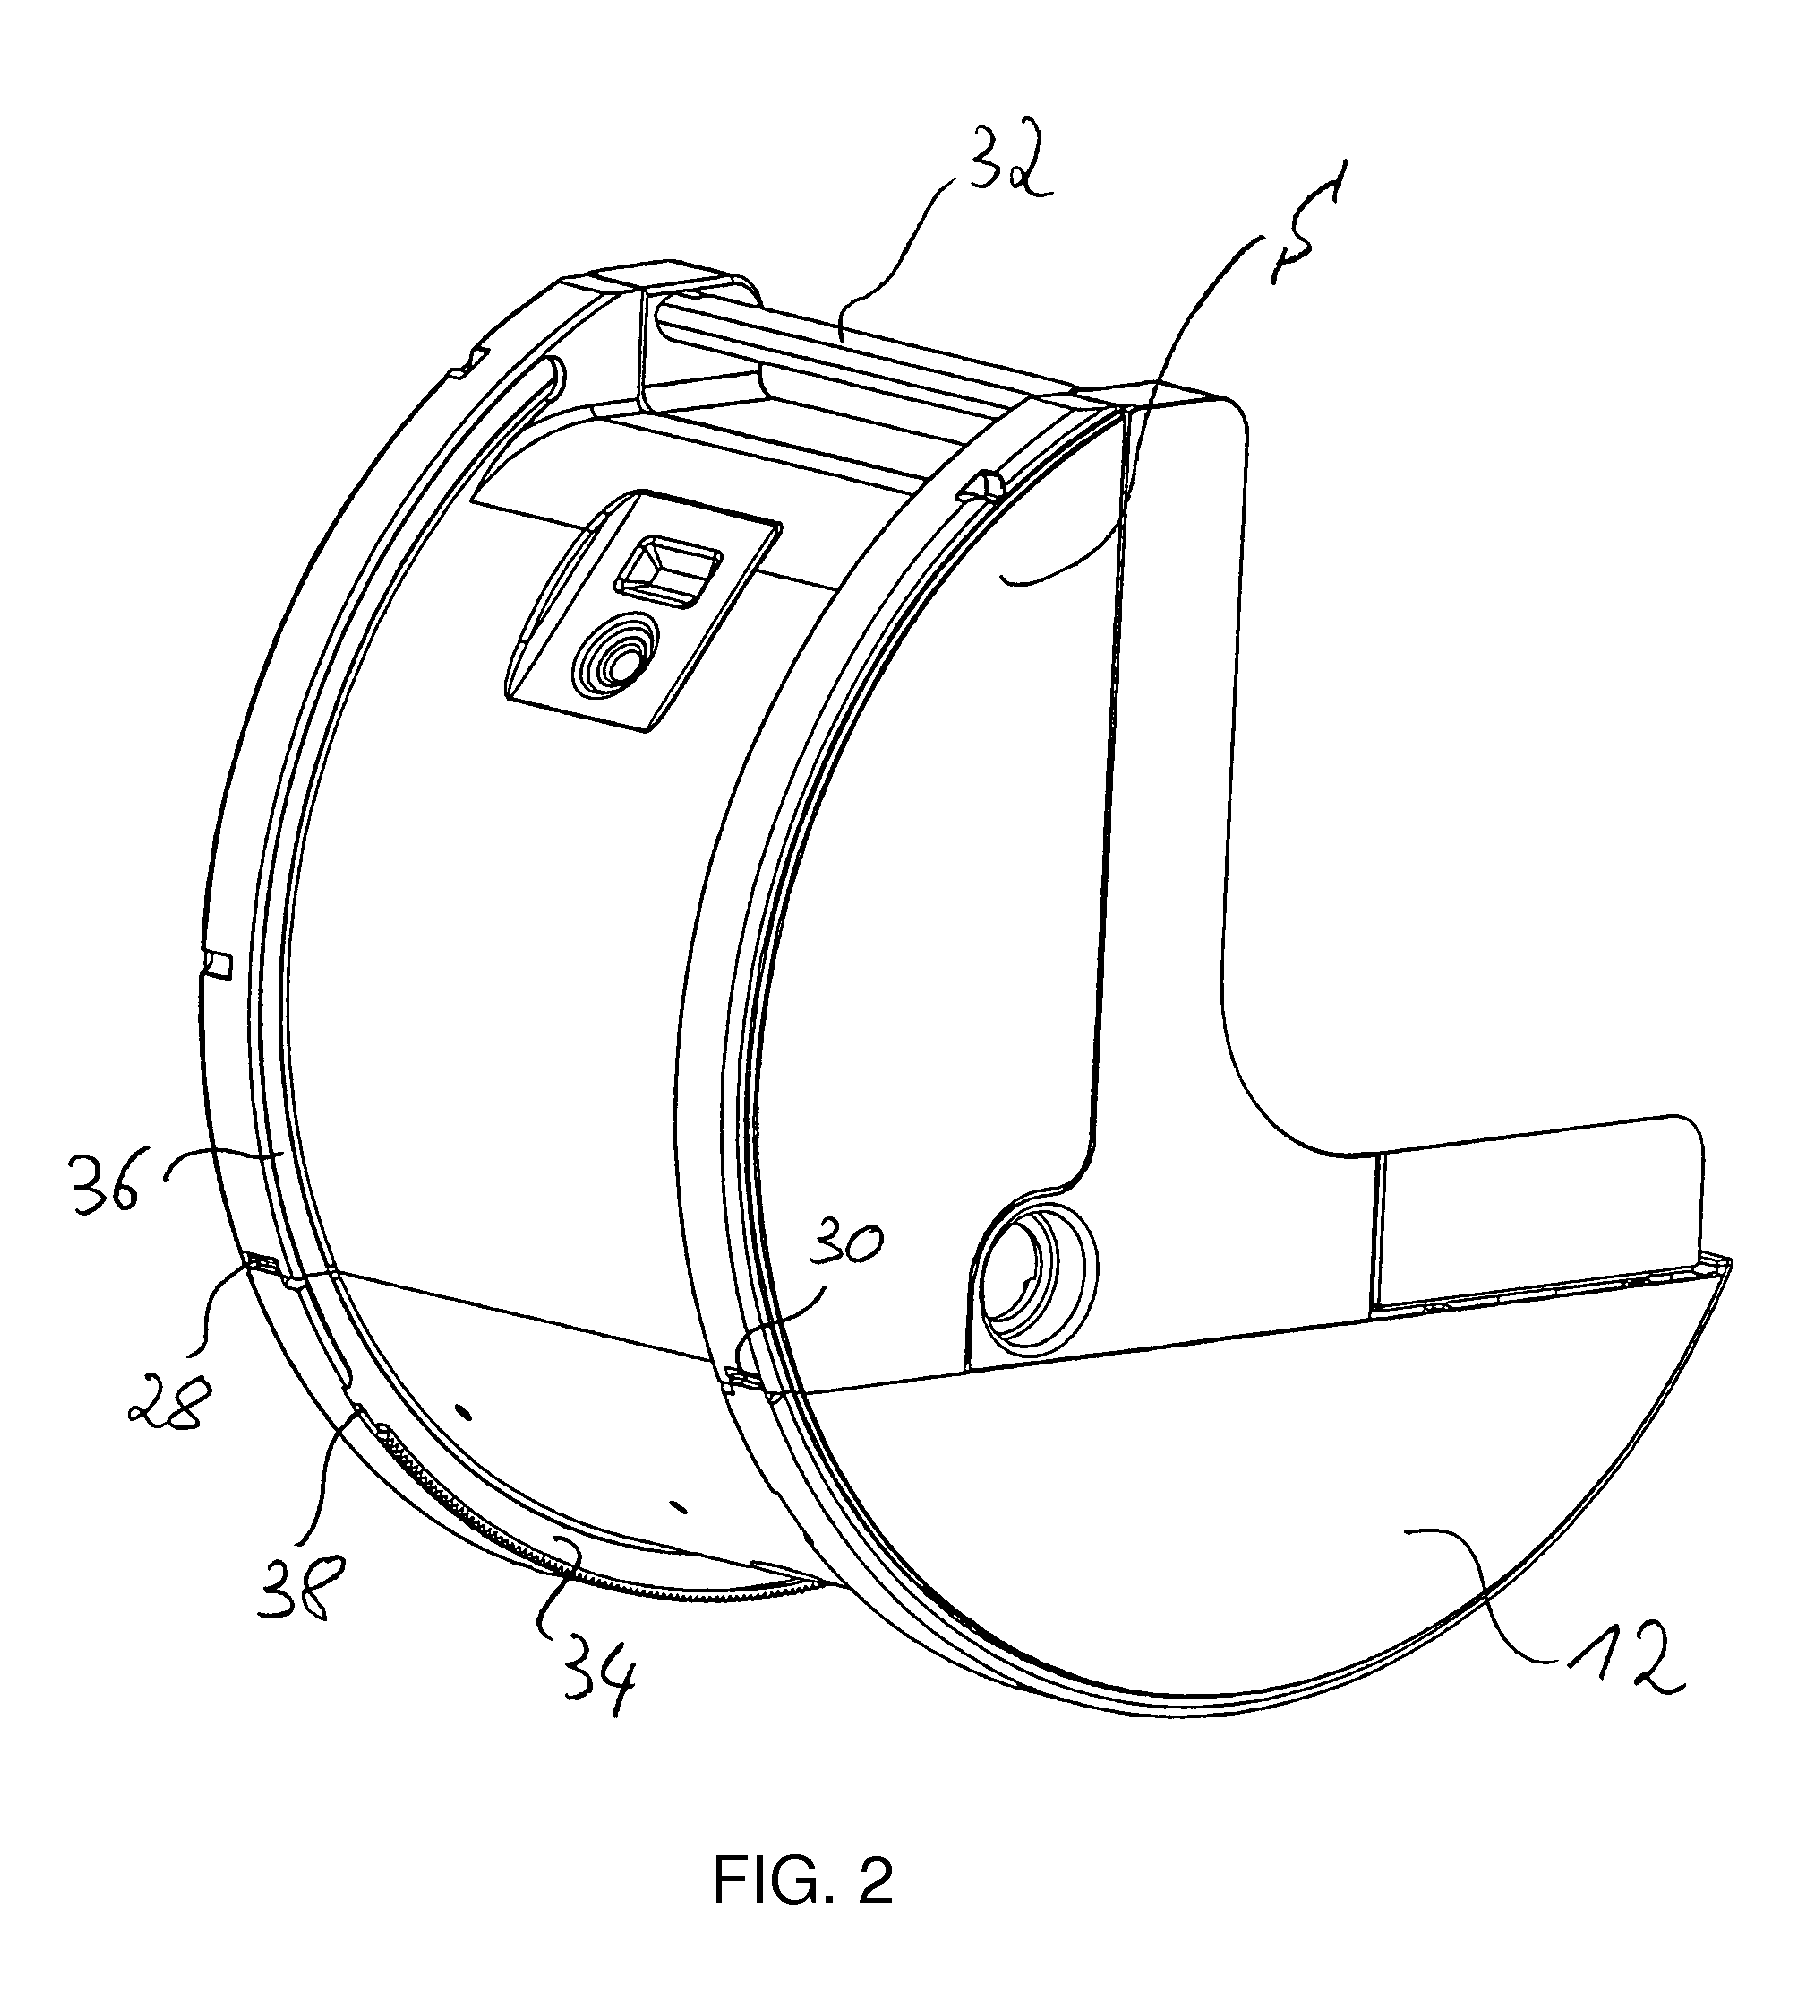 Cardiopulmonary apparatus and methods for preserving life